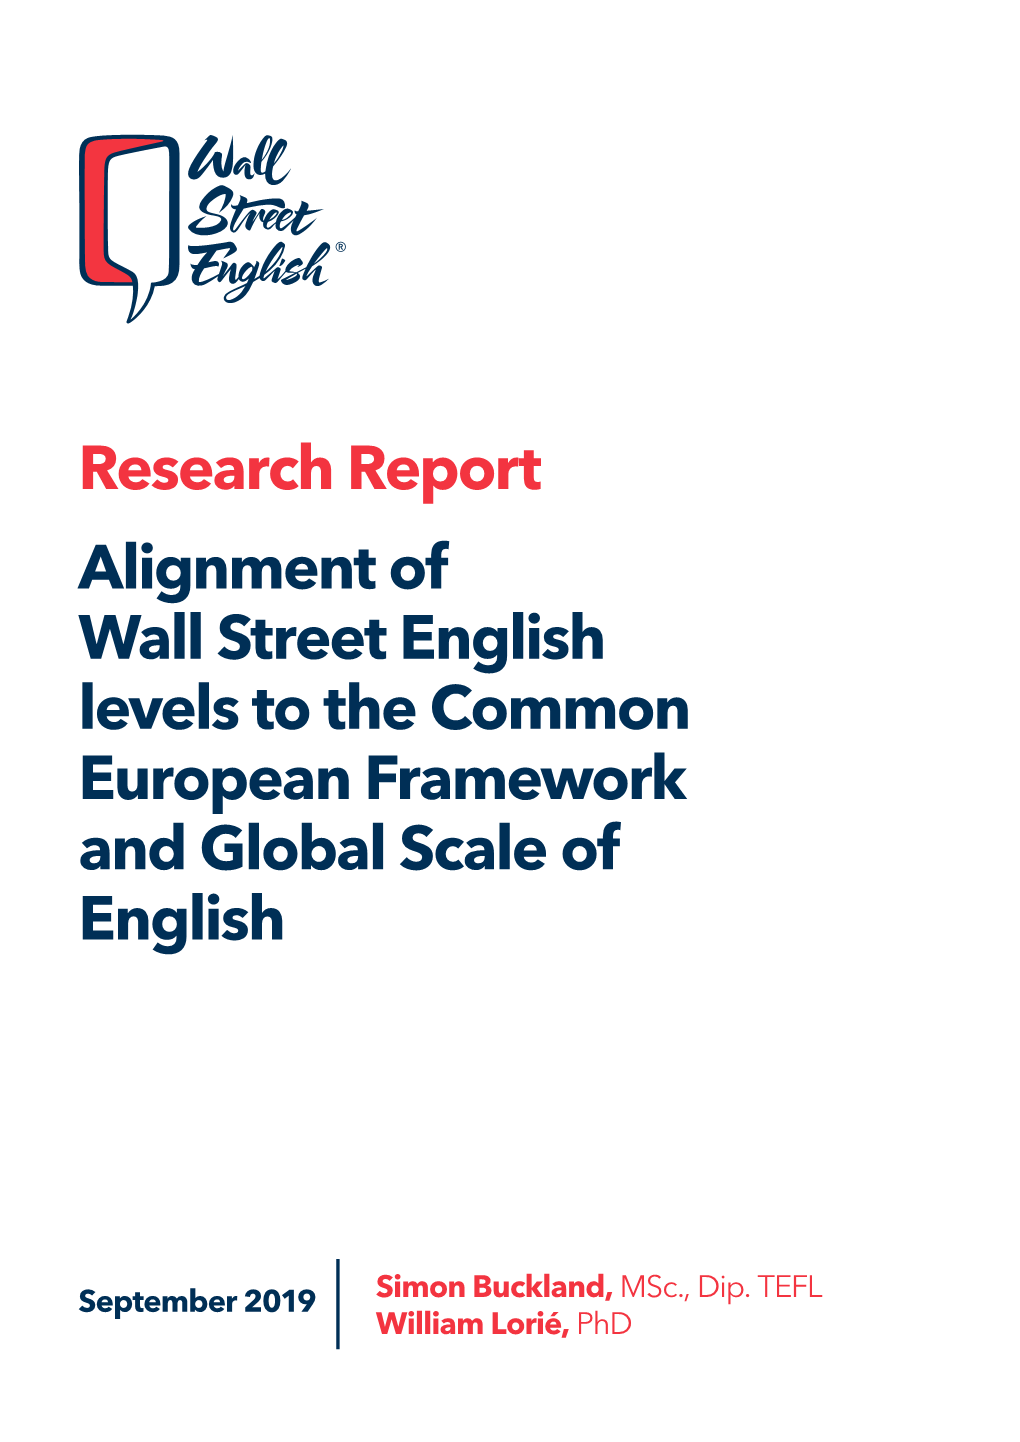 Research Report Alignment of Wall Street English Levels to the Common European Framework and Global Scale of English